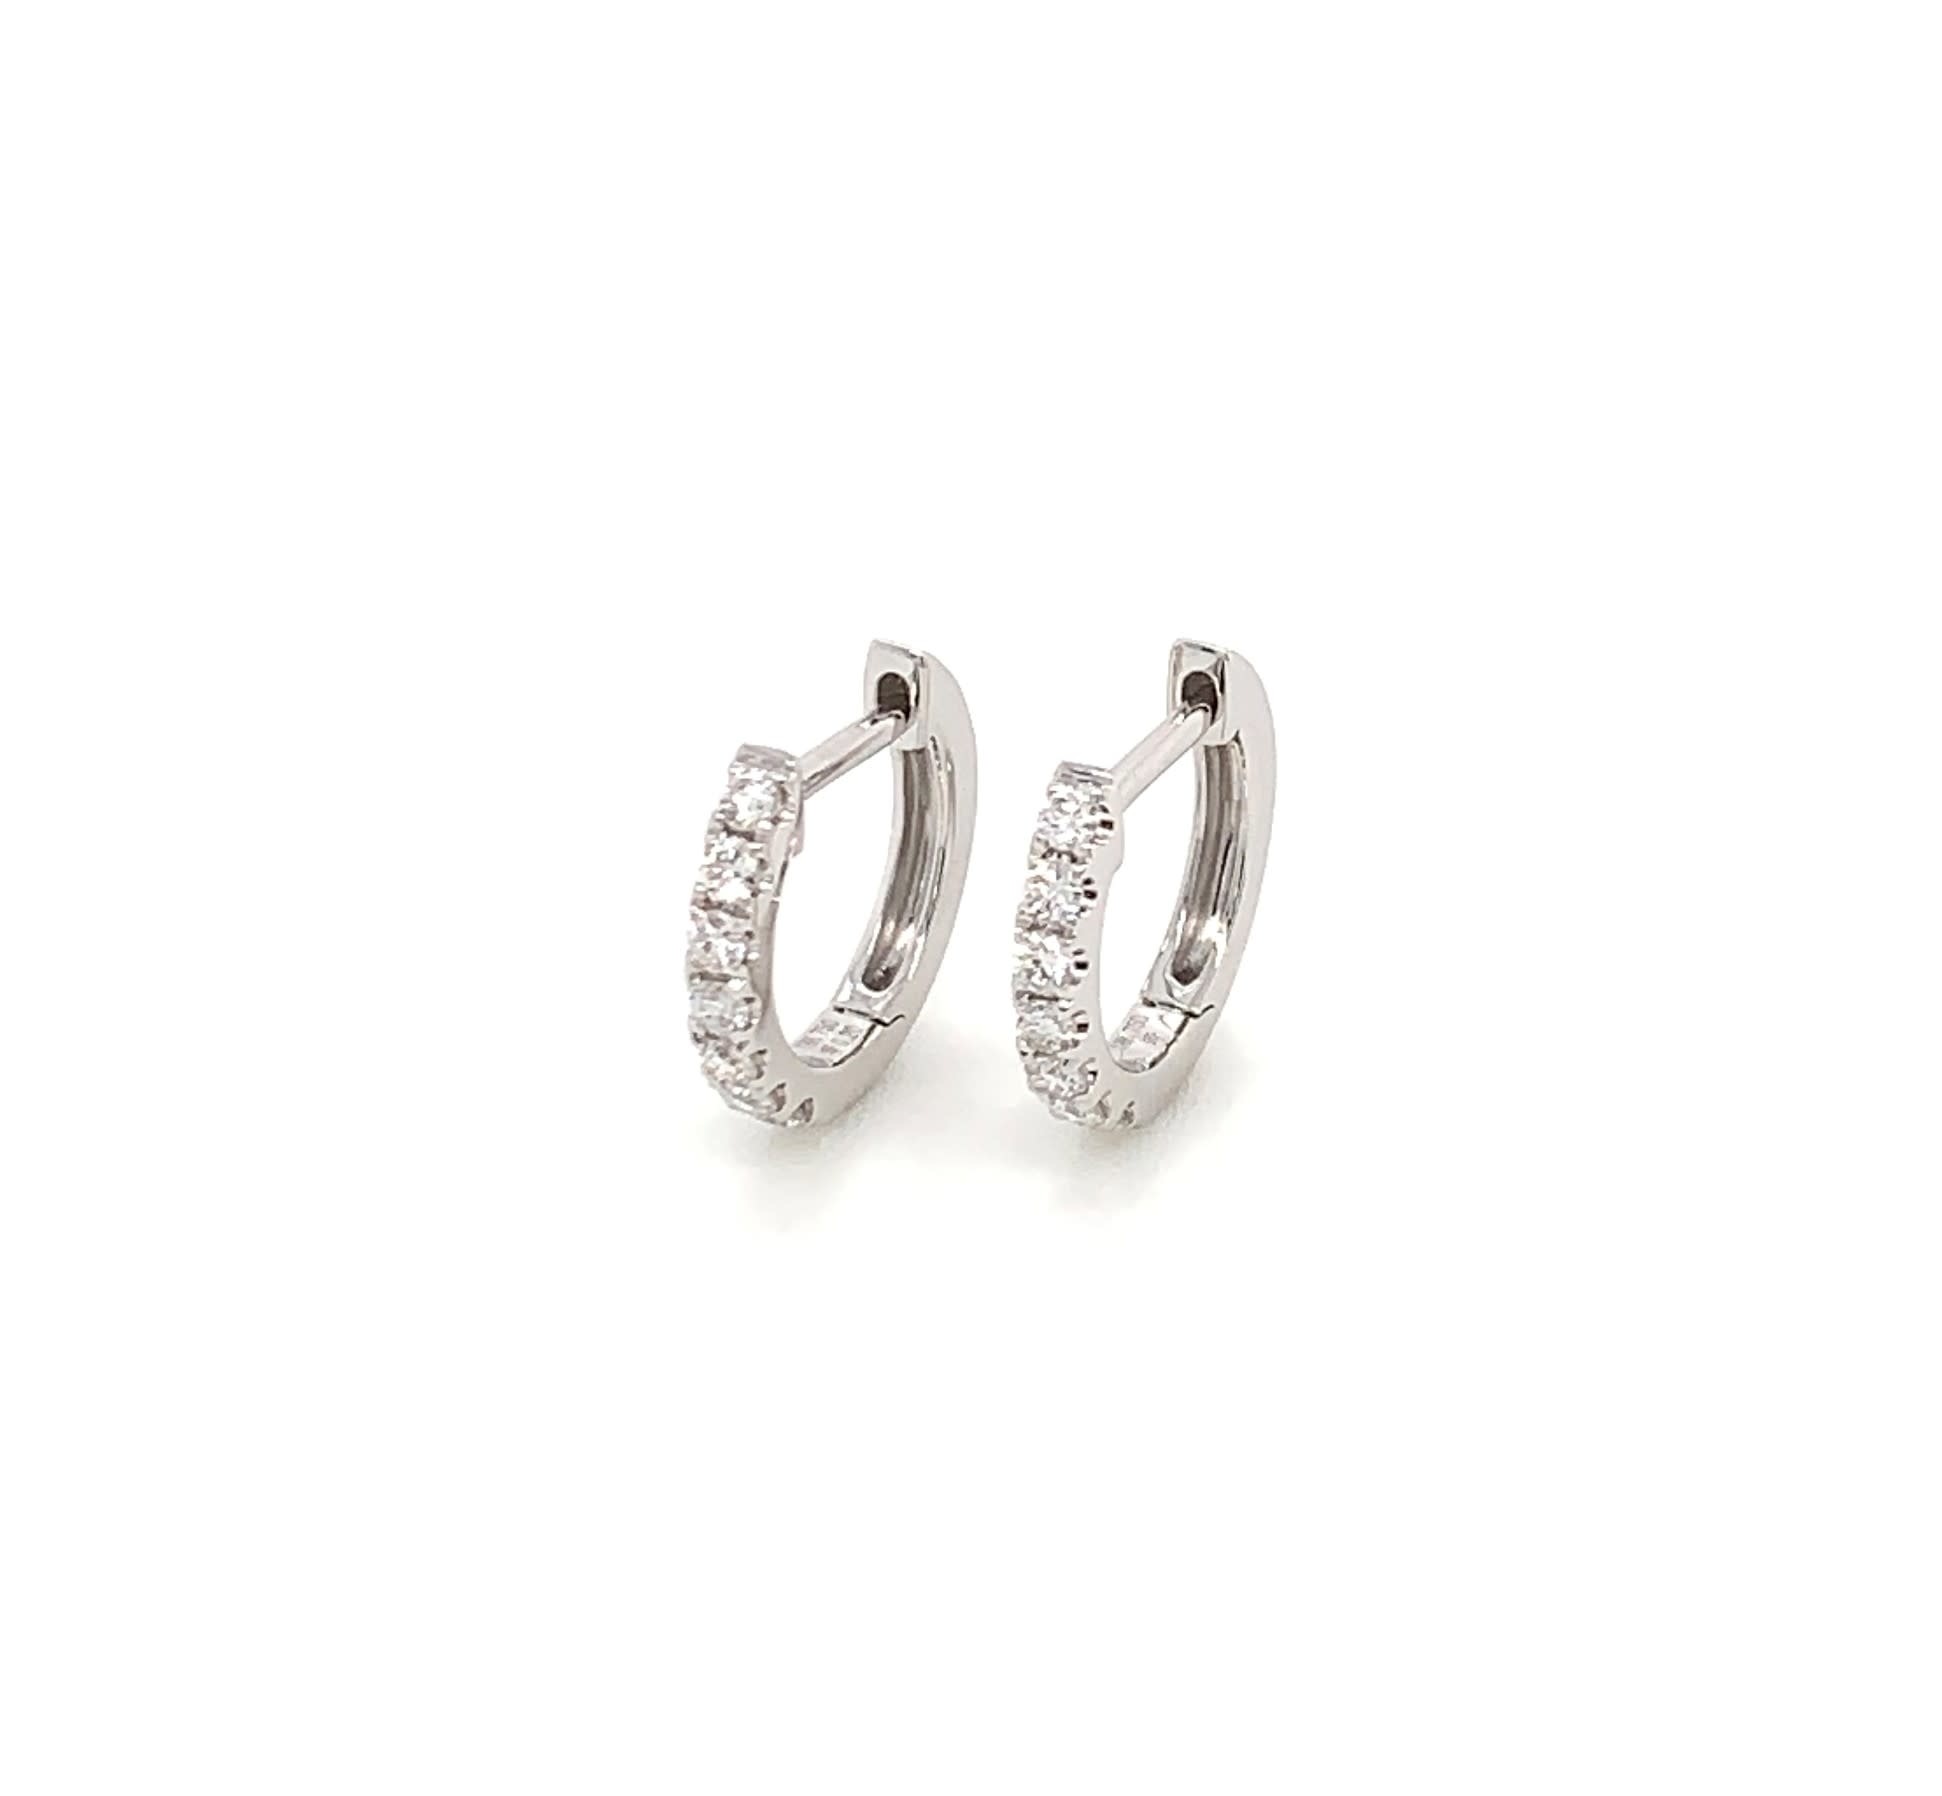 Buy Small Genuine Diamond Stud Earrings / 2.5mm Natural Tiny Diamond Stud  Earrings in 14k White Gold Plated Silver, Small Diamond Studs Online in  India - Etsy